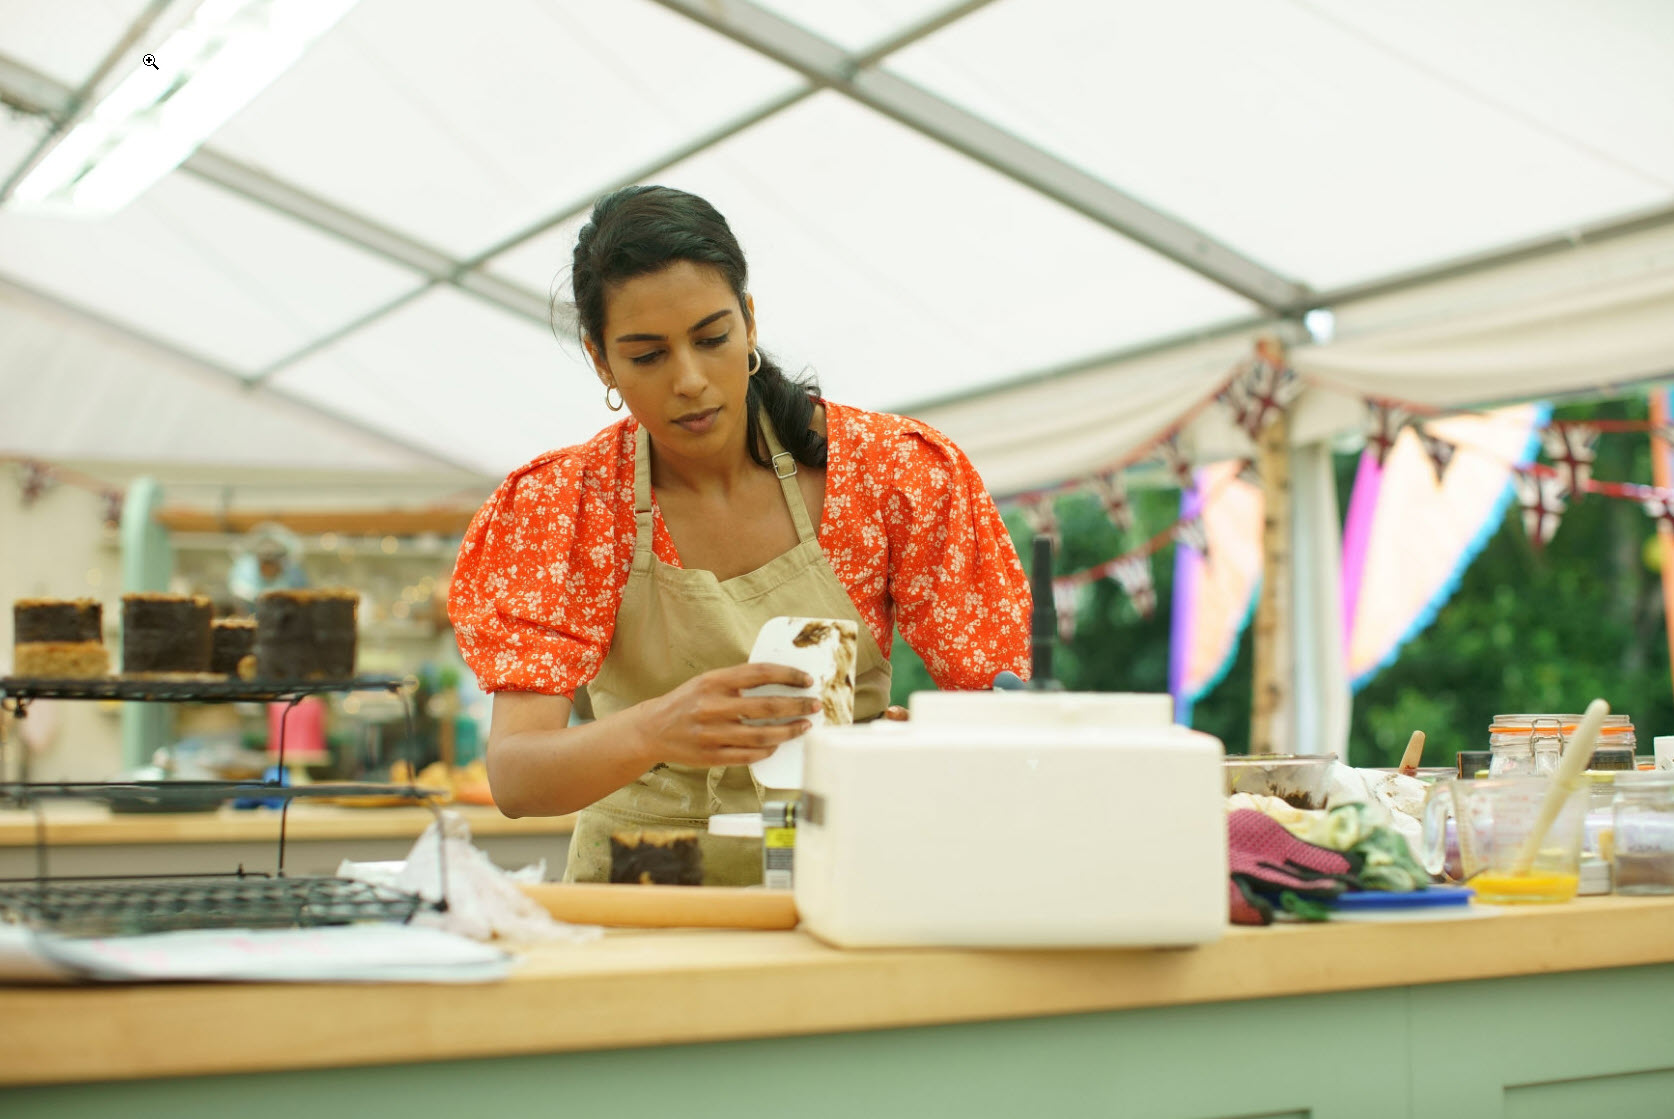 Crystelle Pereira in the “Great British Bake Off”